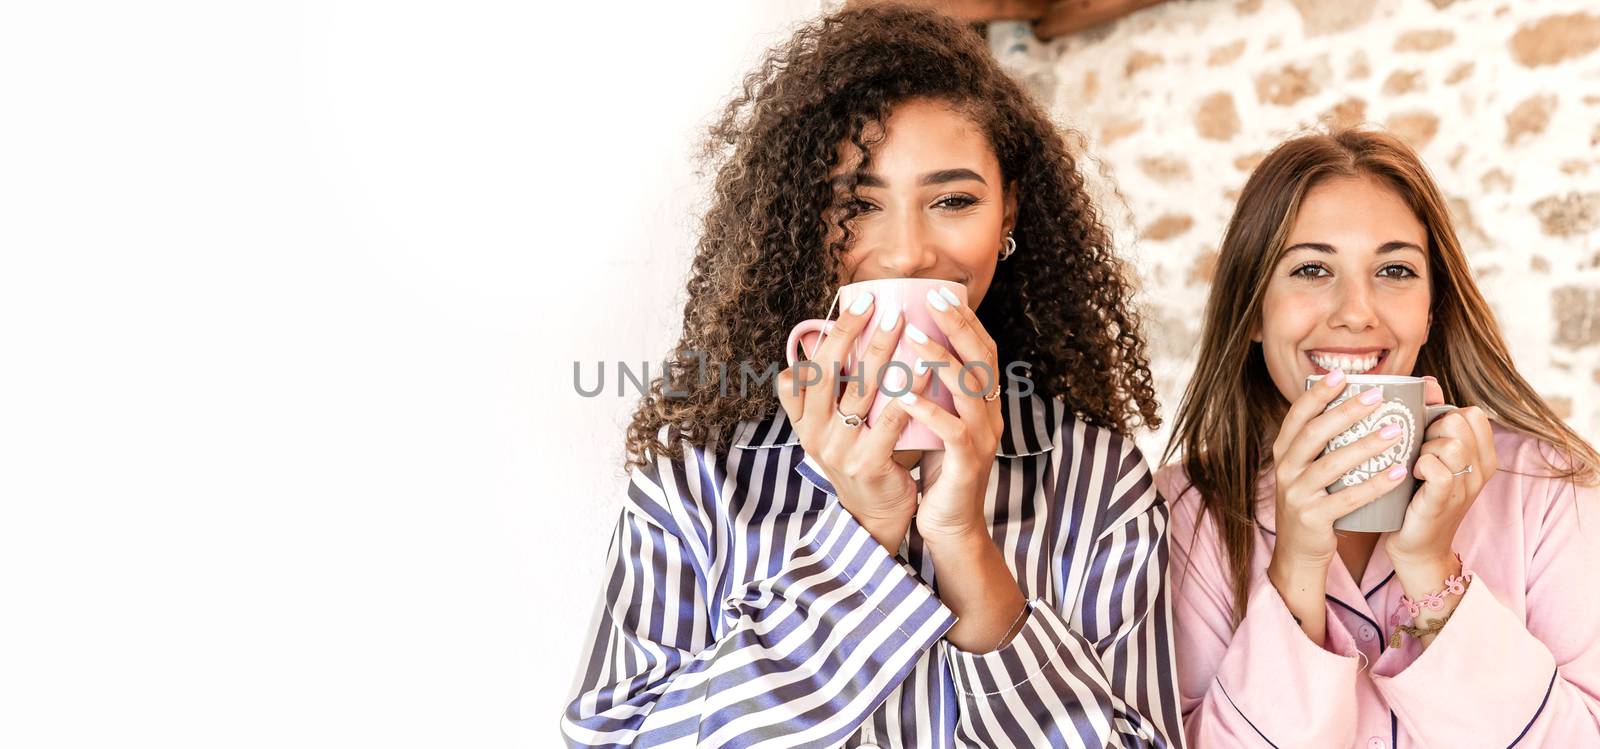 Mixed race female couple in pajama just woken up standing outdoor drinking tea looking at the camera - Two women friends smiling holding a mug with large white copy space to the left